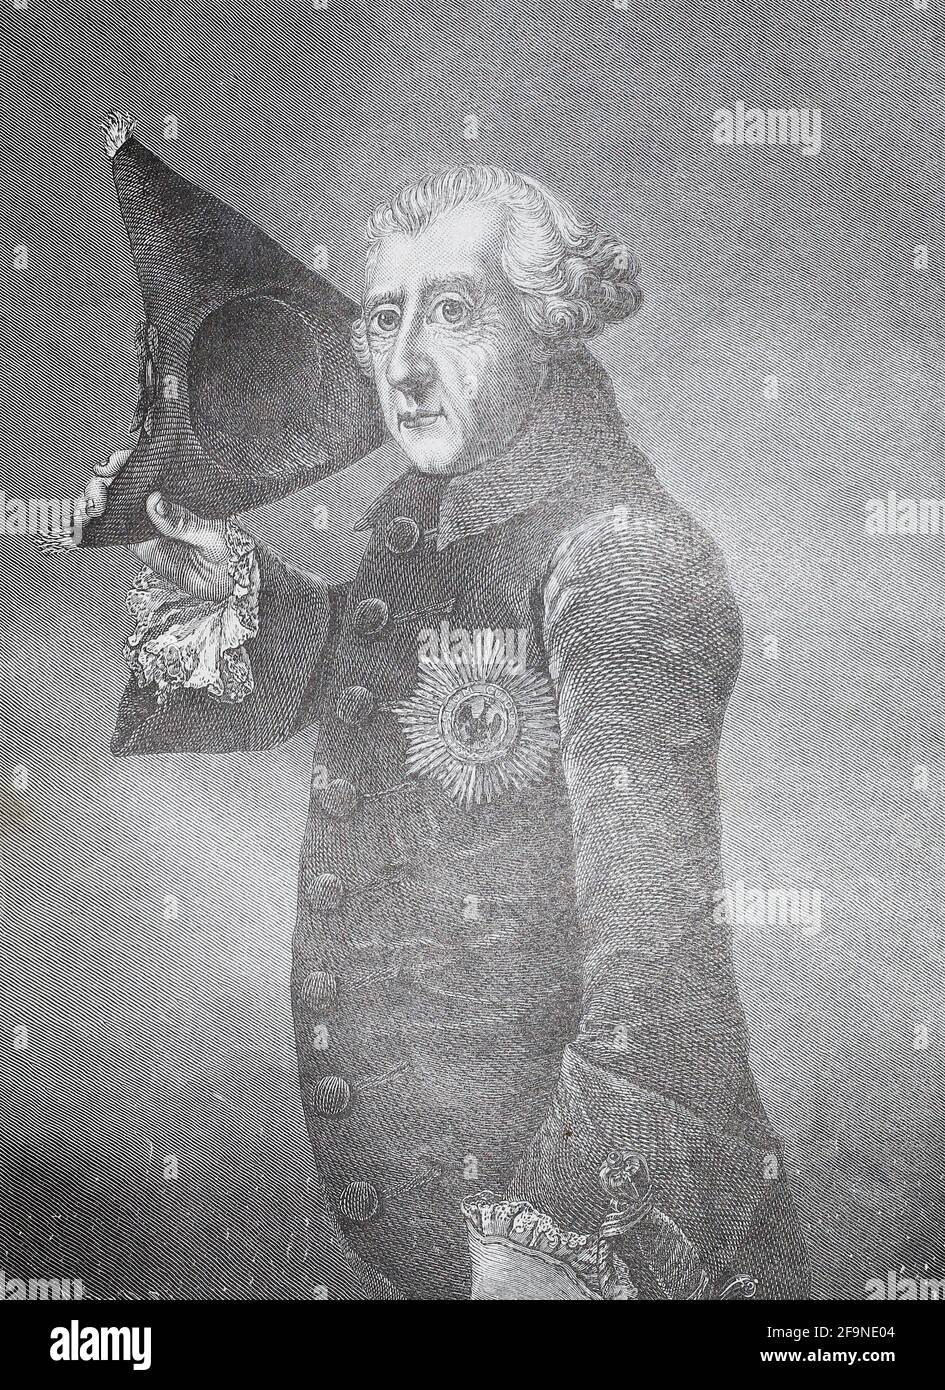 Frederick the Great. Engraving of 1764. Frederick II was a Prussian king and military leader who ruled the Kingdom of Prussia from 1740 until 1786, reigning longer than any other Hohenzollern king. Stock Photo